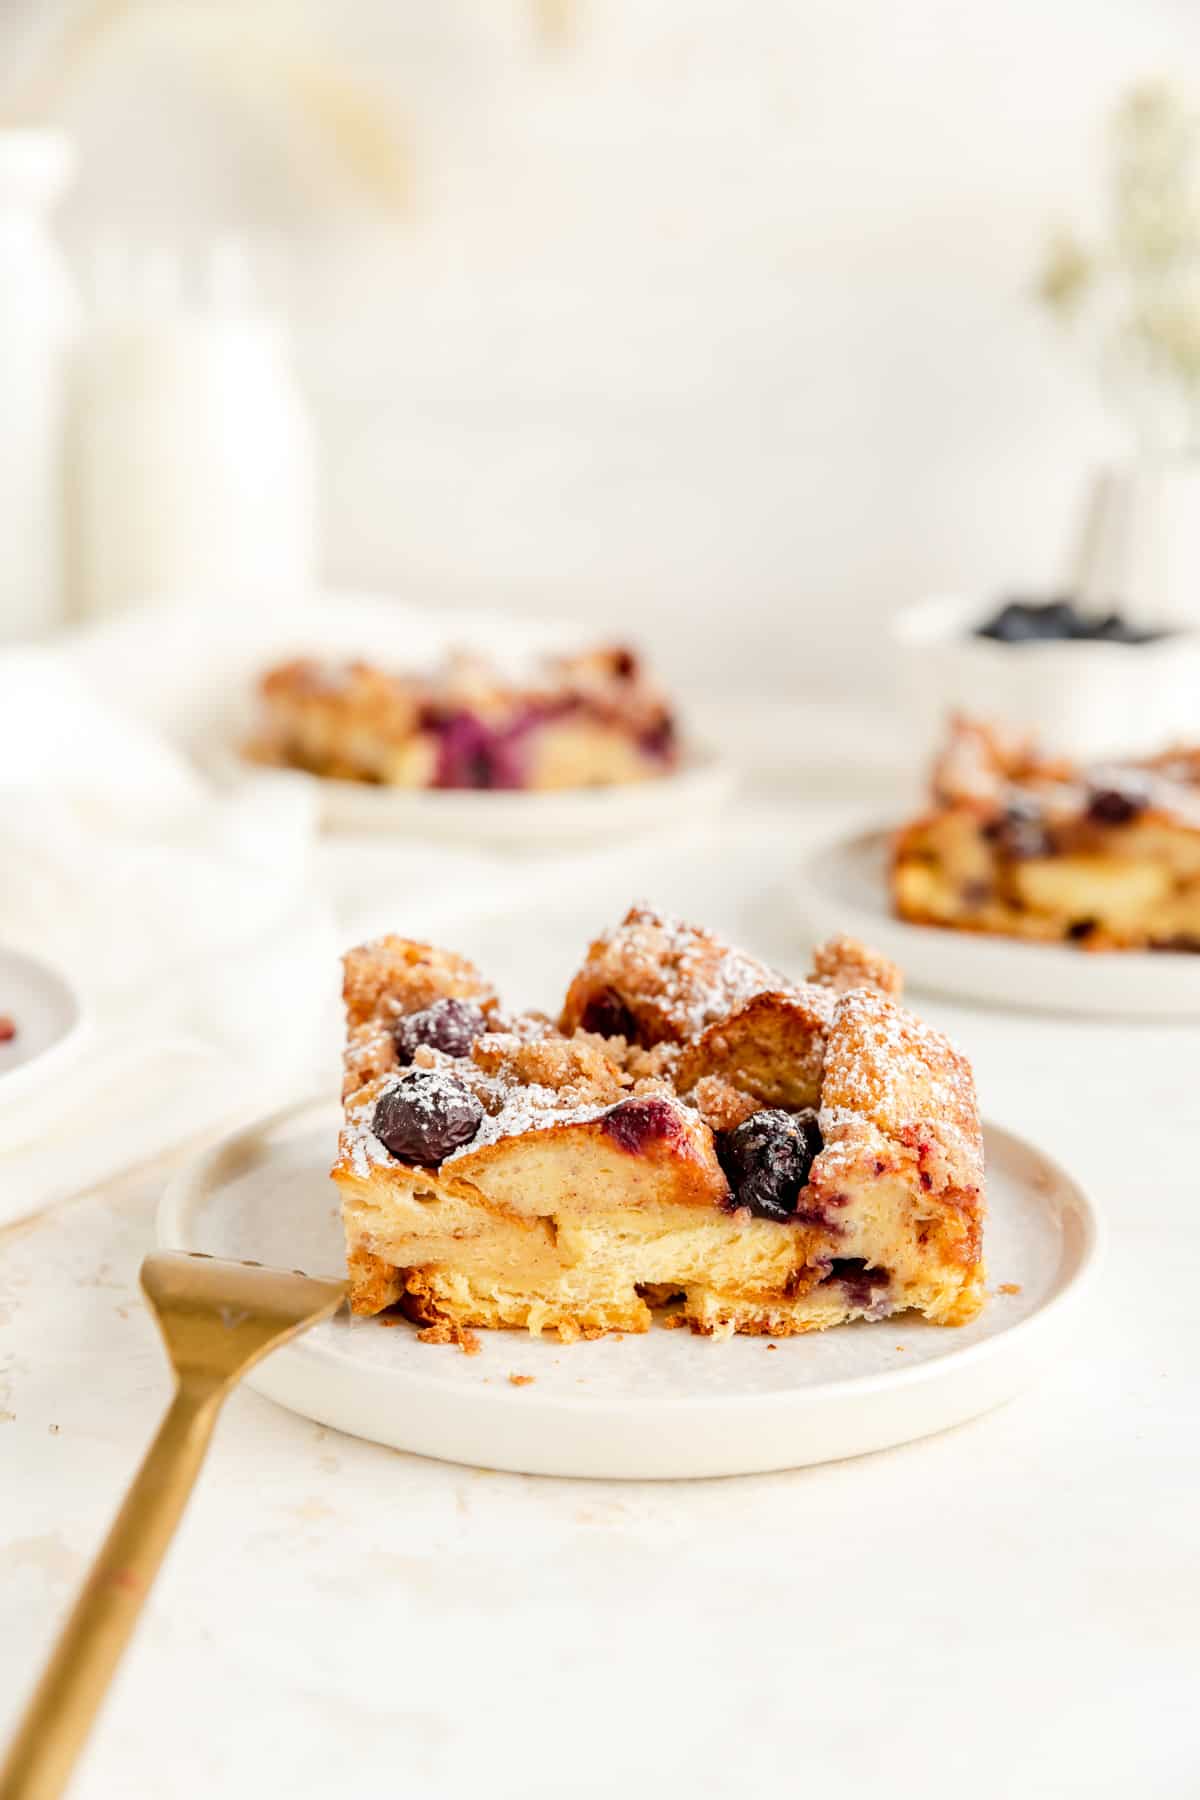 side view of french toast casserole with blueberries piece on plate with other pieces in background.